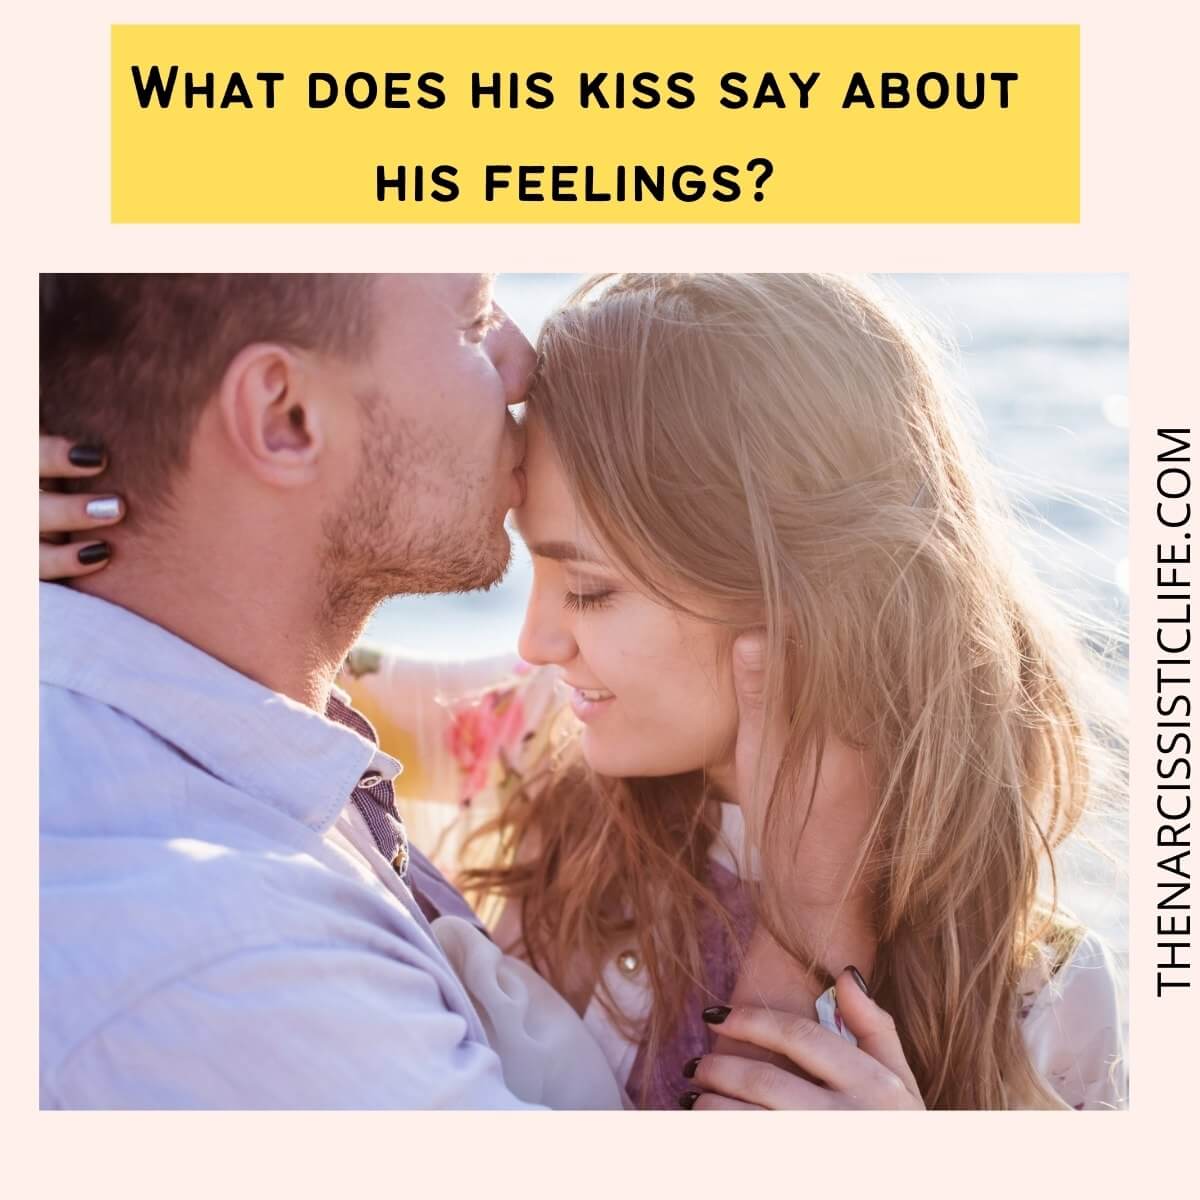 Guy when putting a kisses starts How to